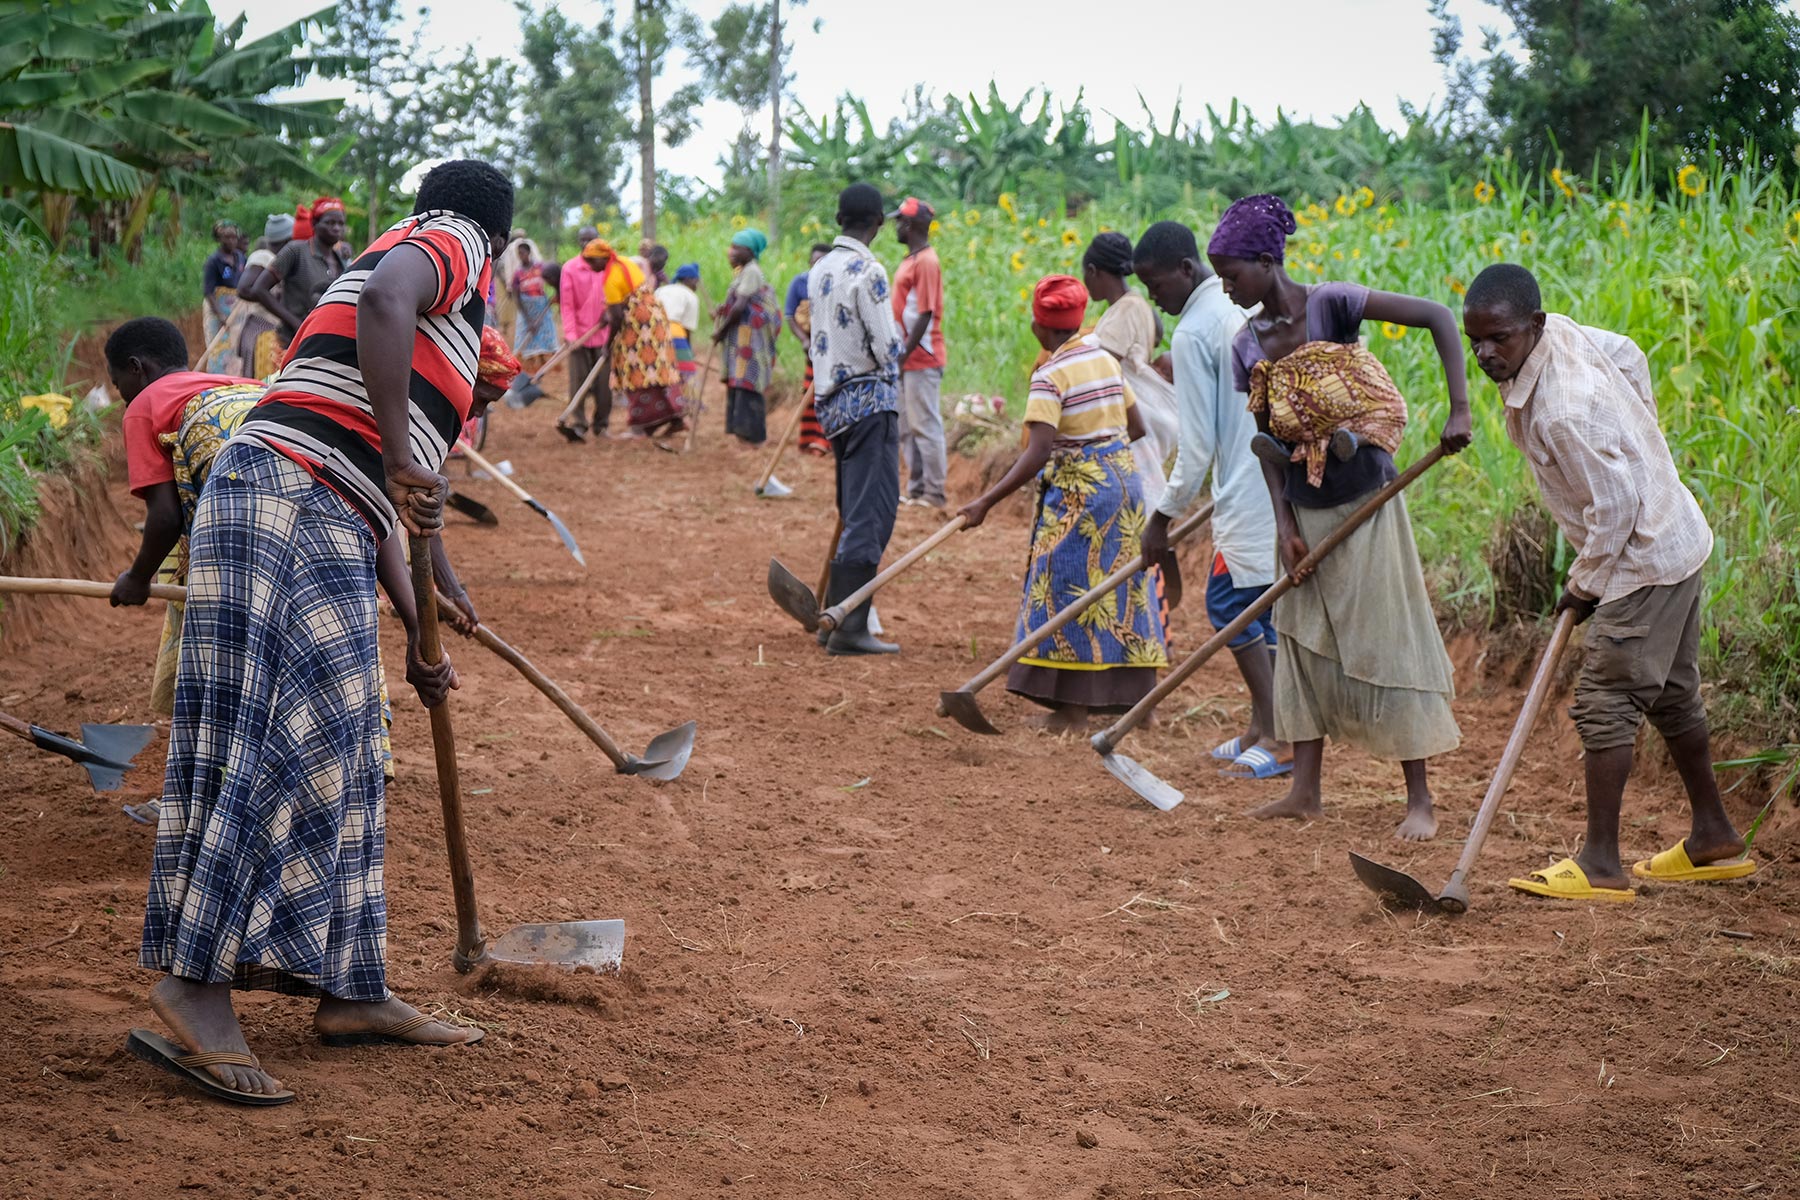 The group is working to establish a road through Mishiha Hill as part of the 10 micro-projects implemented by LWF Burundi and the Canadian Food Grains Bank.